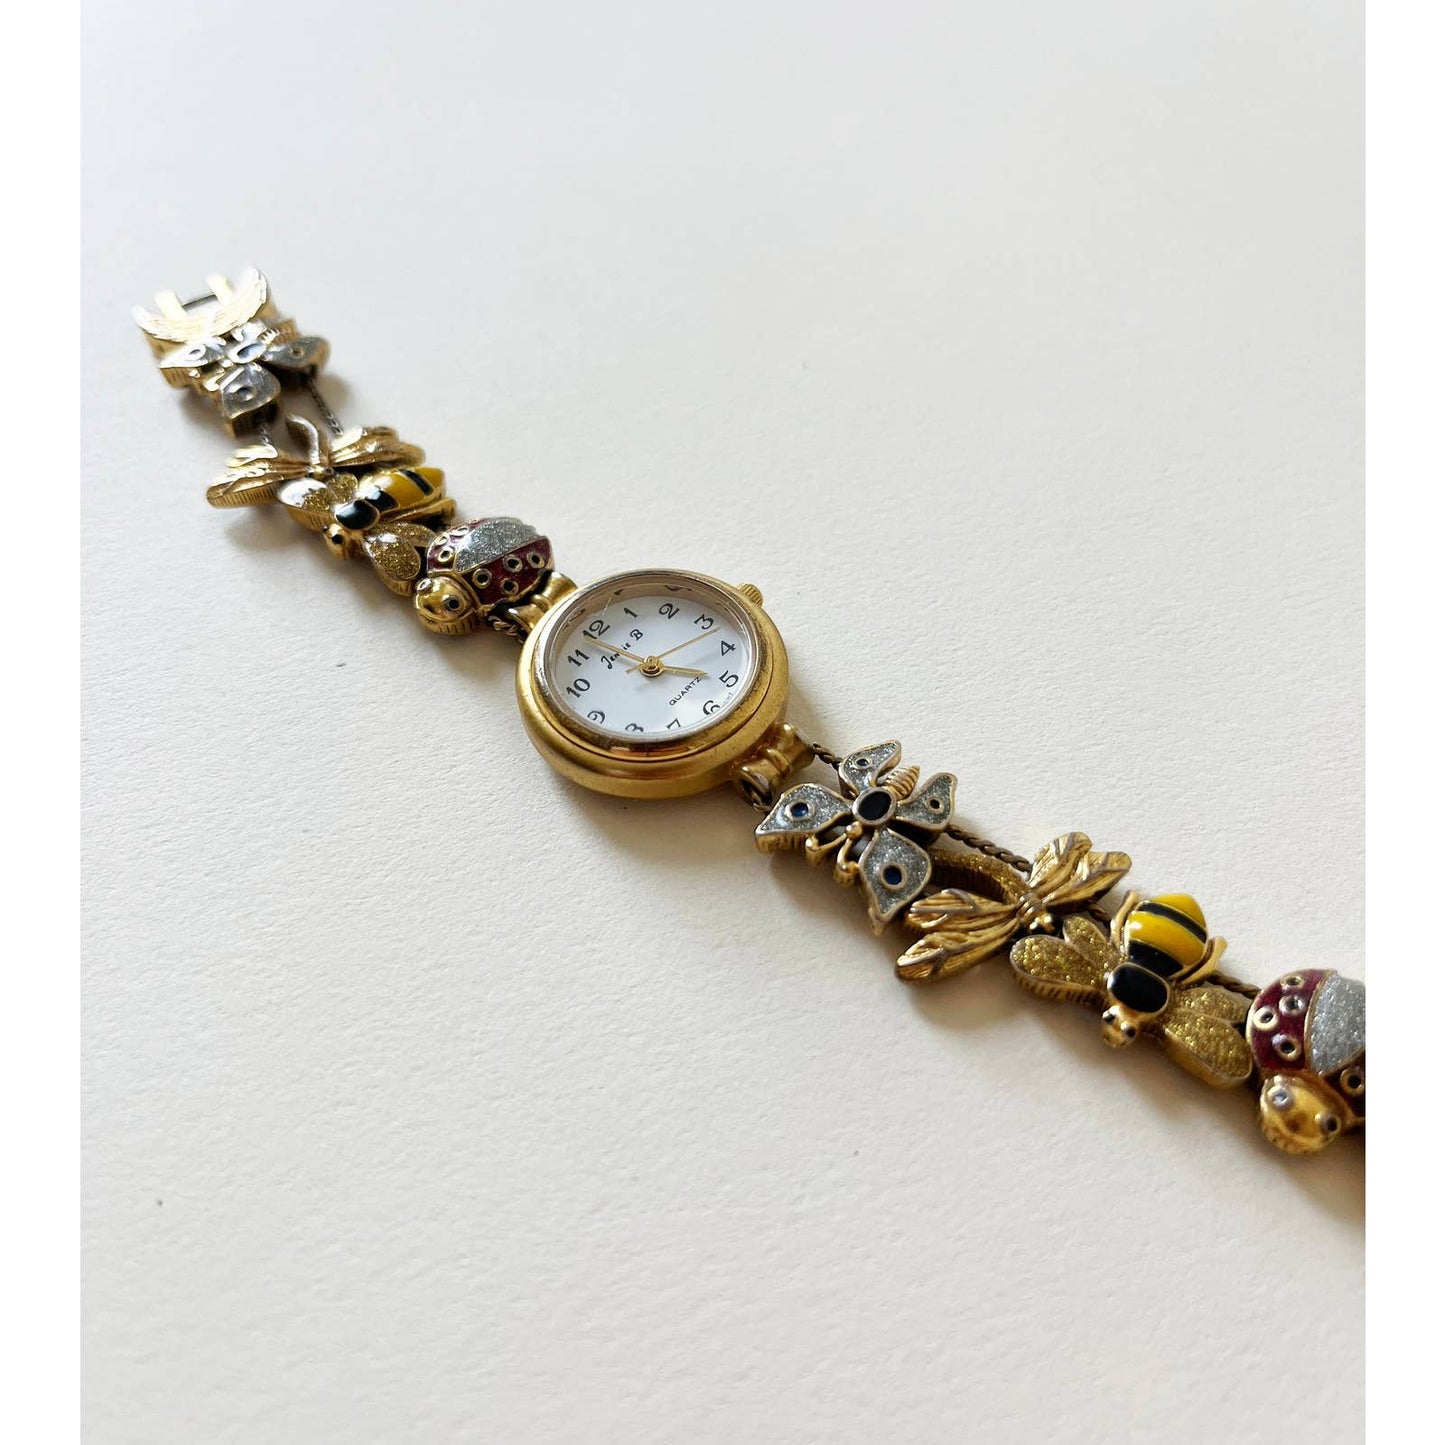 Vintage Rare Whimsical Insect Bracelet Watch